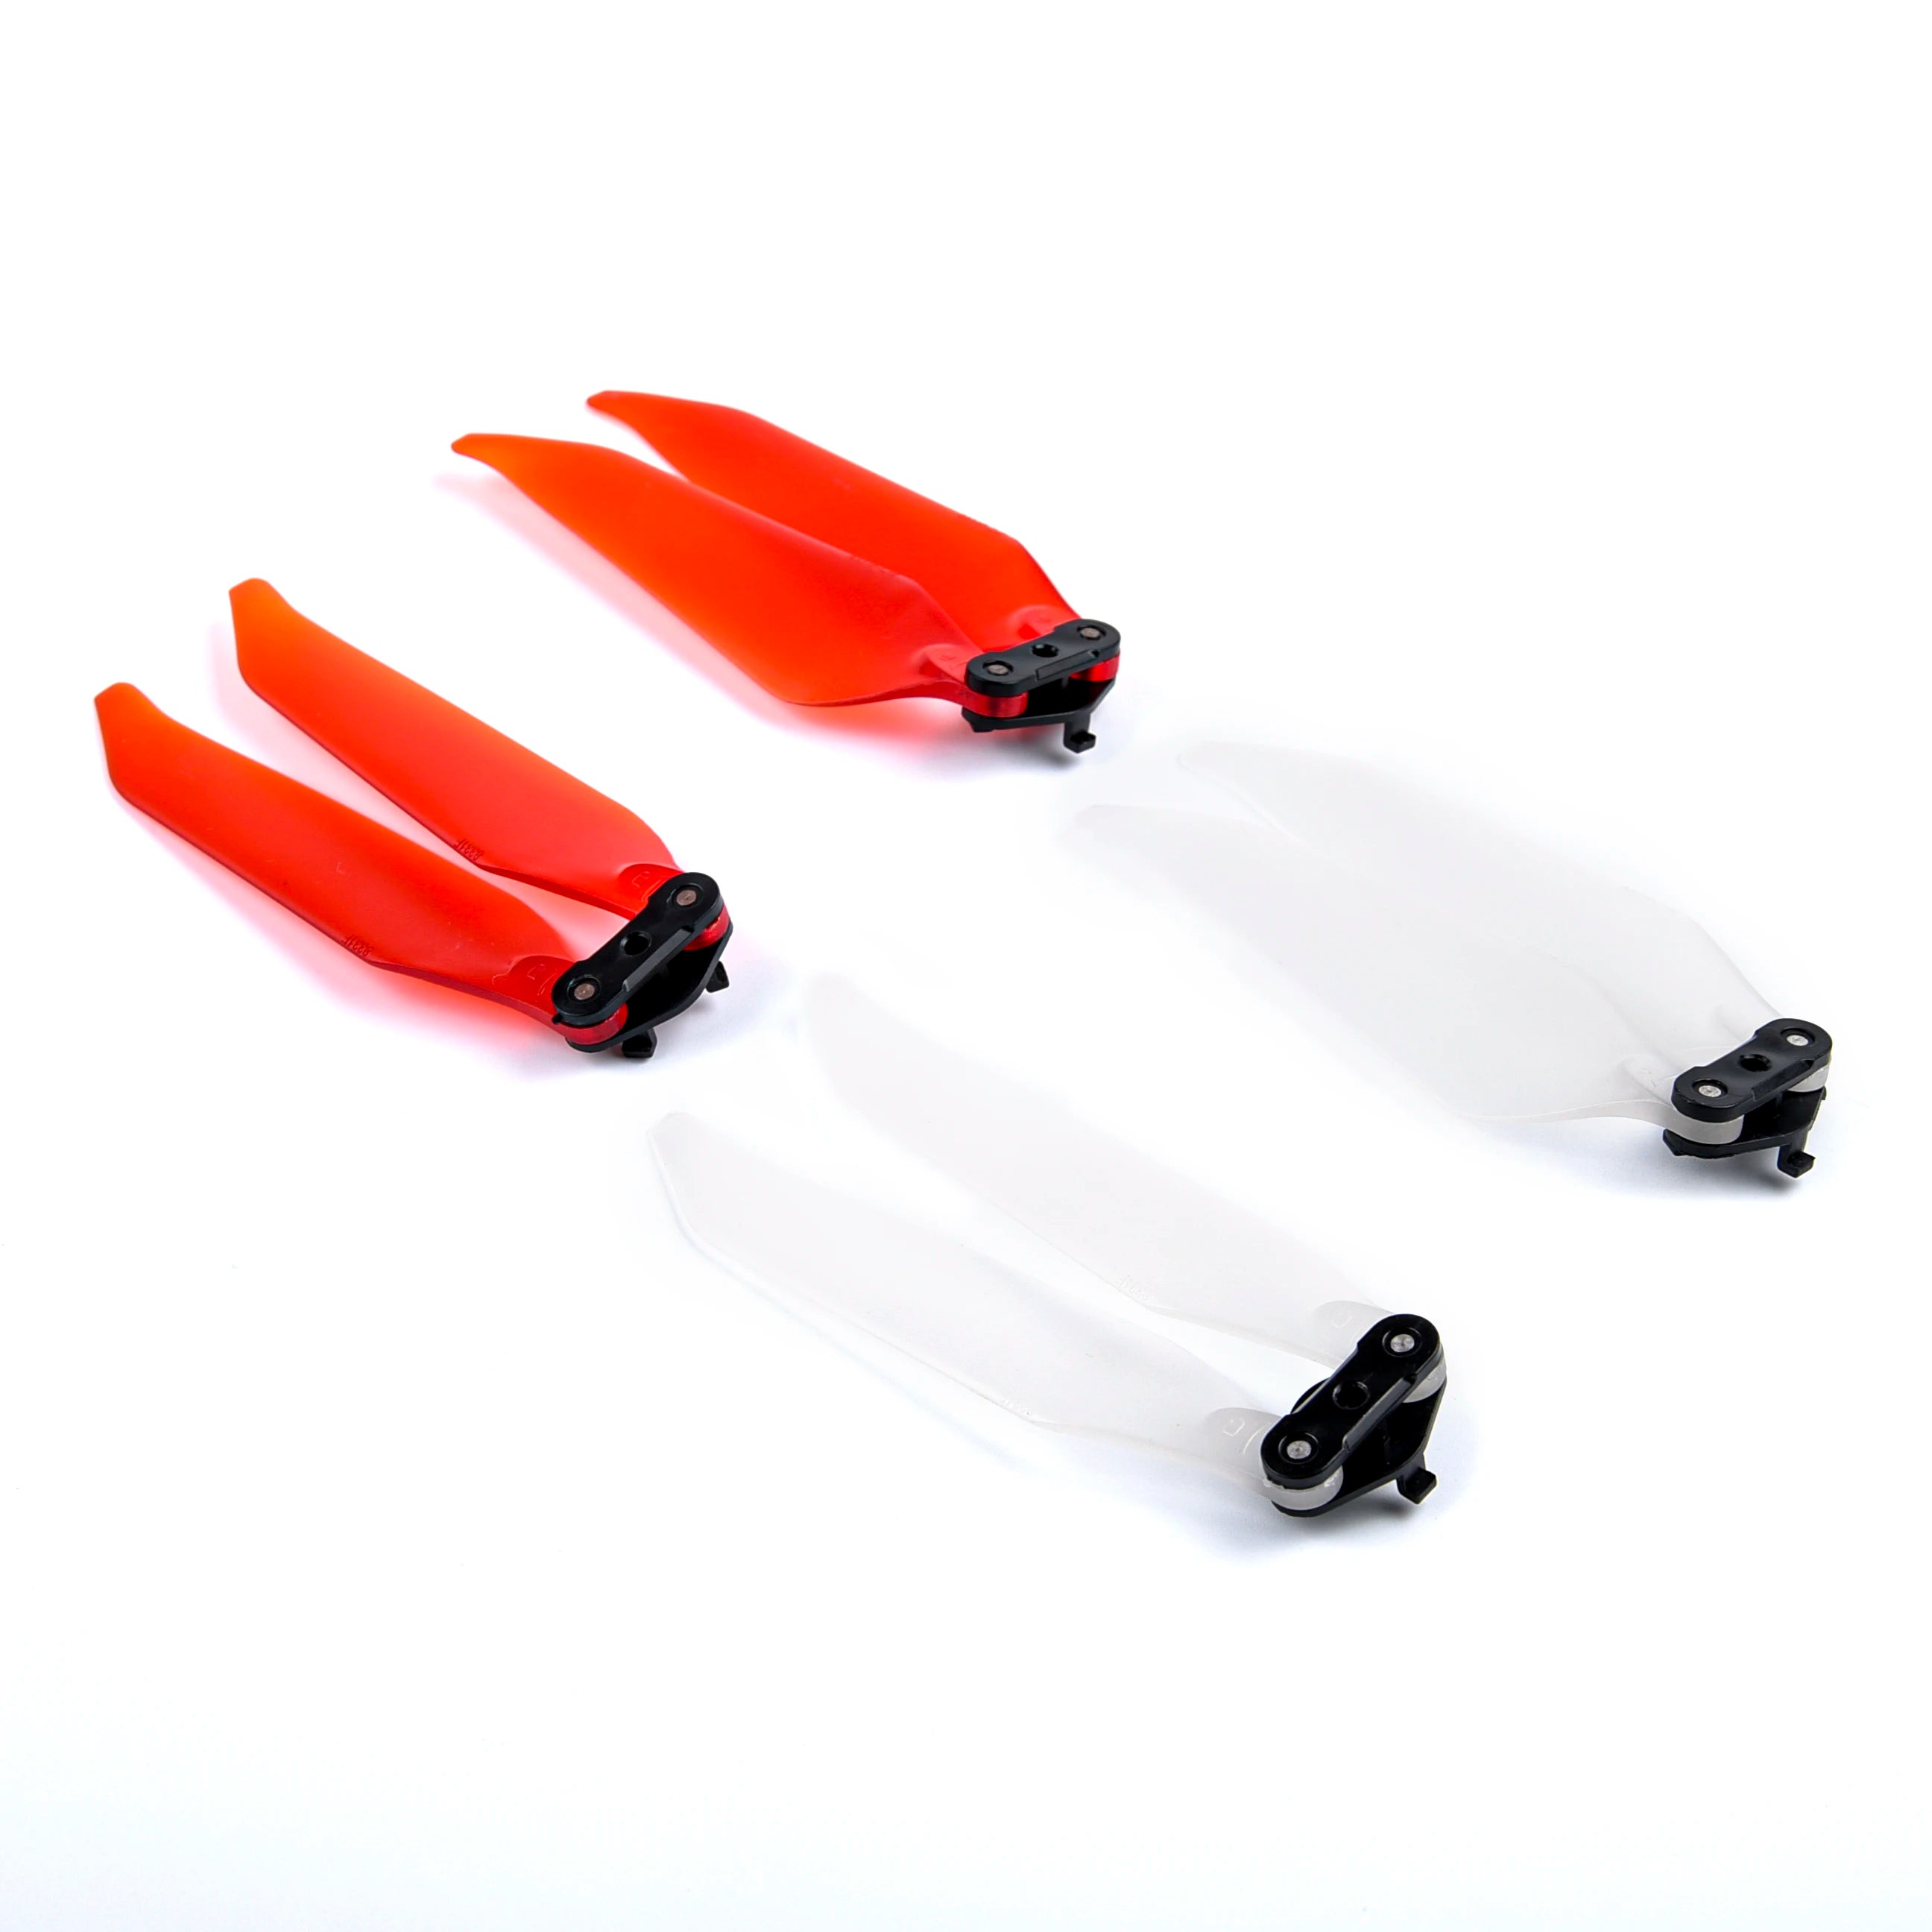 8331 8331F Low Noise Propeller, the 8331 propeller is softer than 8330 propeller . the propeller